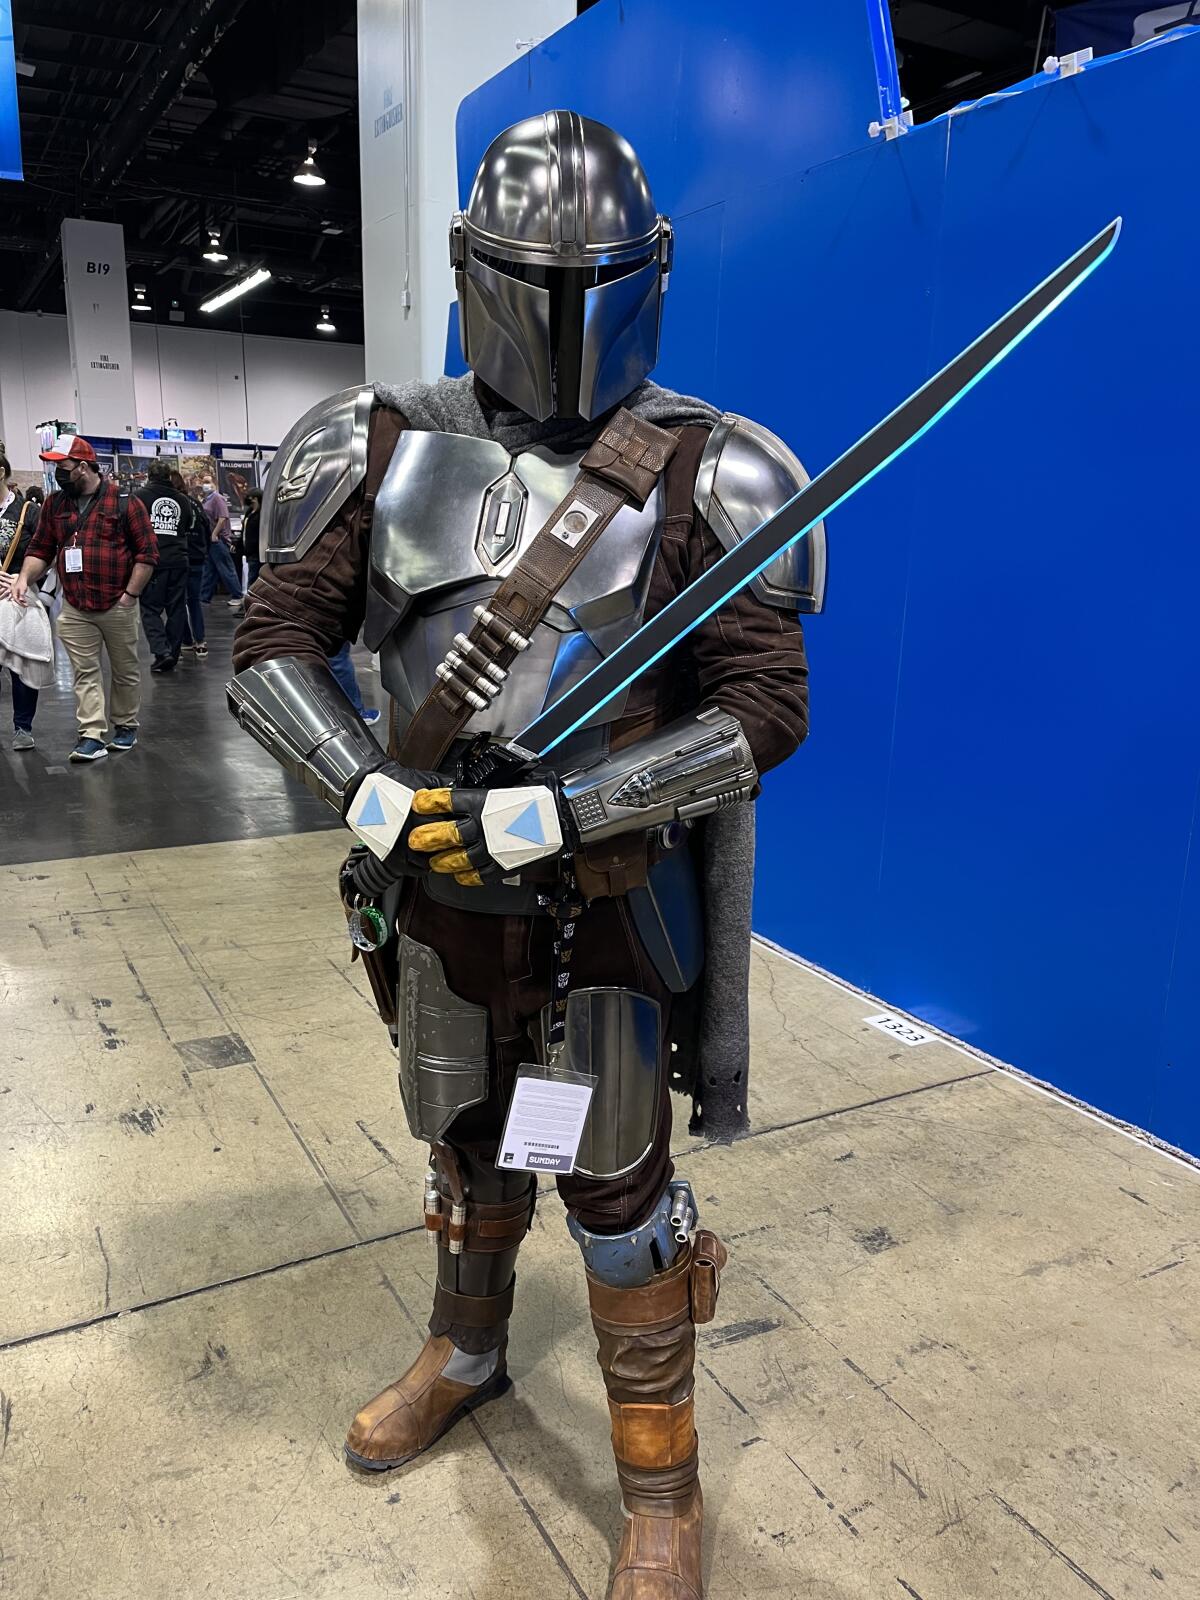 Andrew Butler attended WonderCon Anaheim in a Mandalorian costume he 3D-printed.